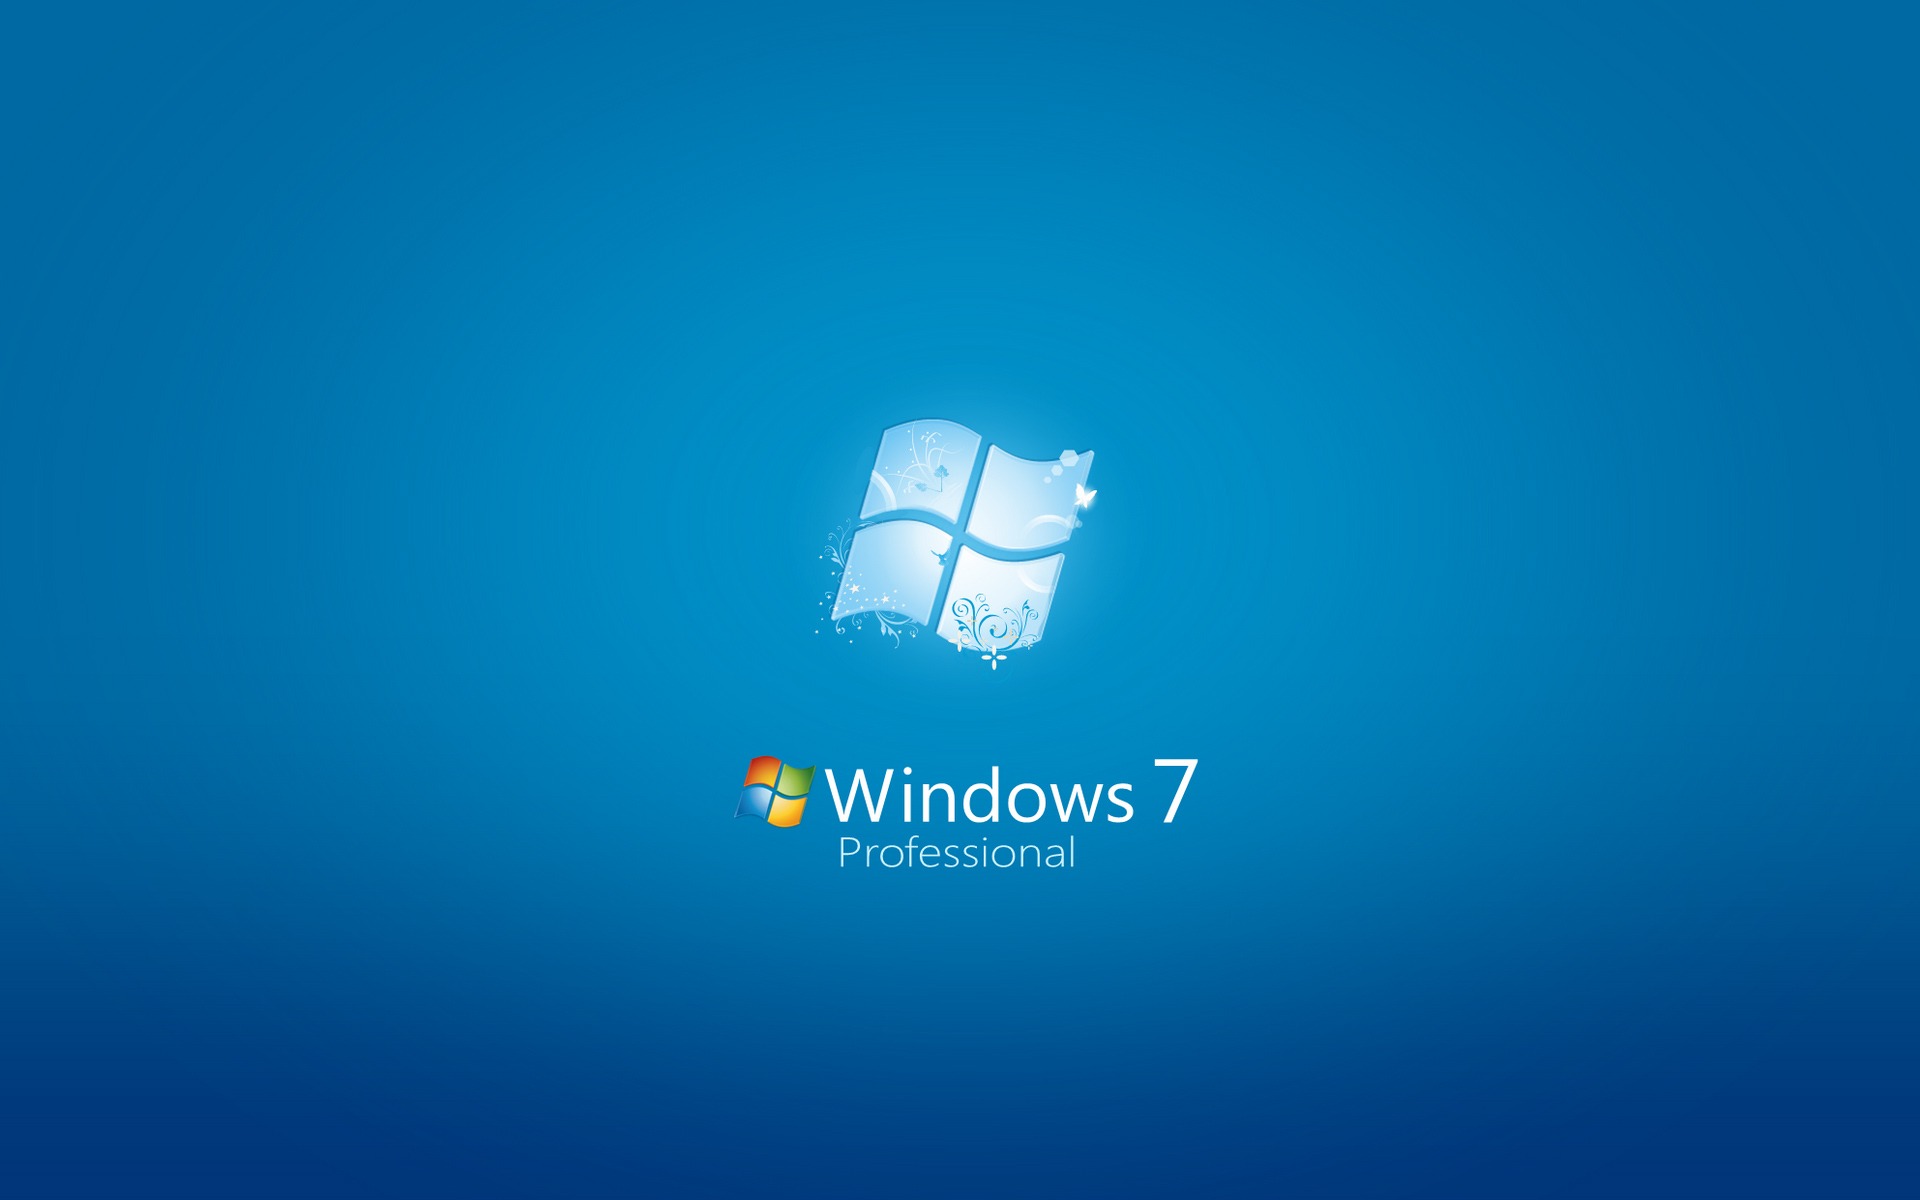 Windows Professional Wallpapers HD Wallpapers